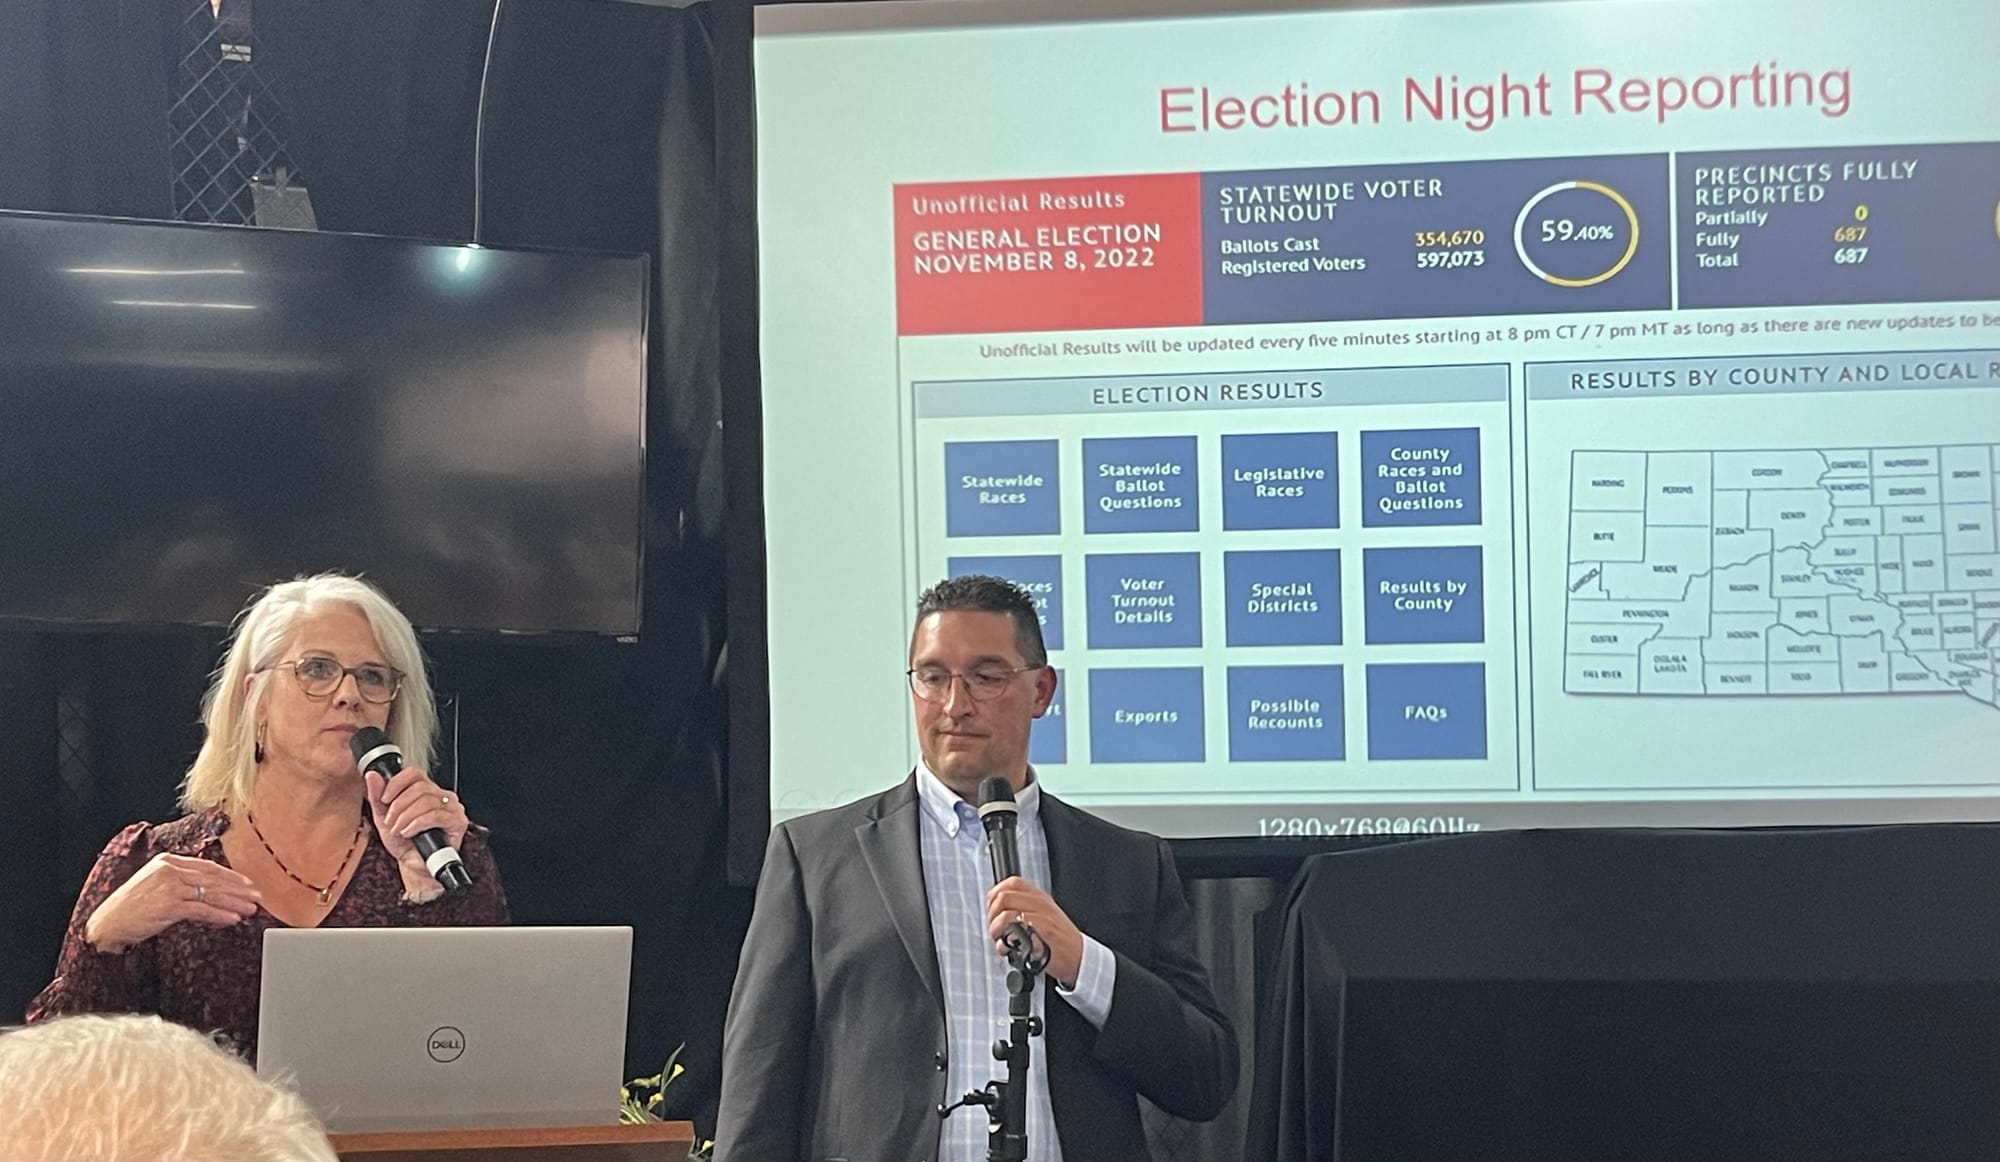 Jessica Pollema (left) speaks at an event to discuss 2020 election results